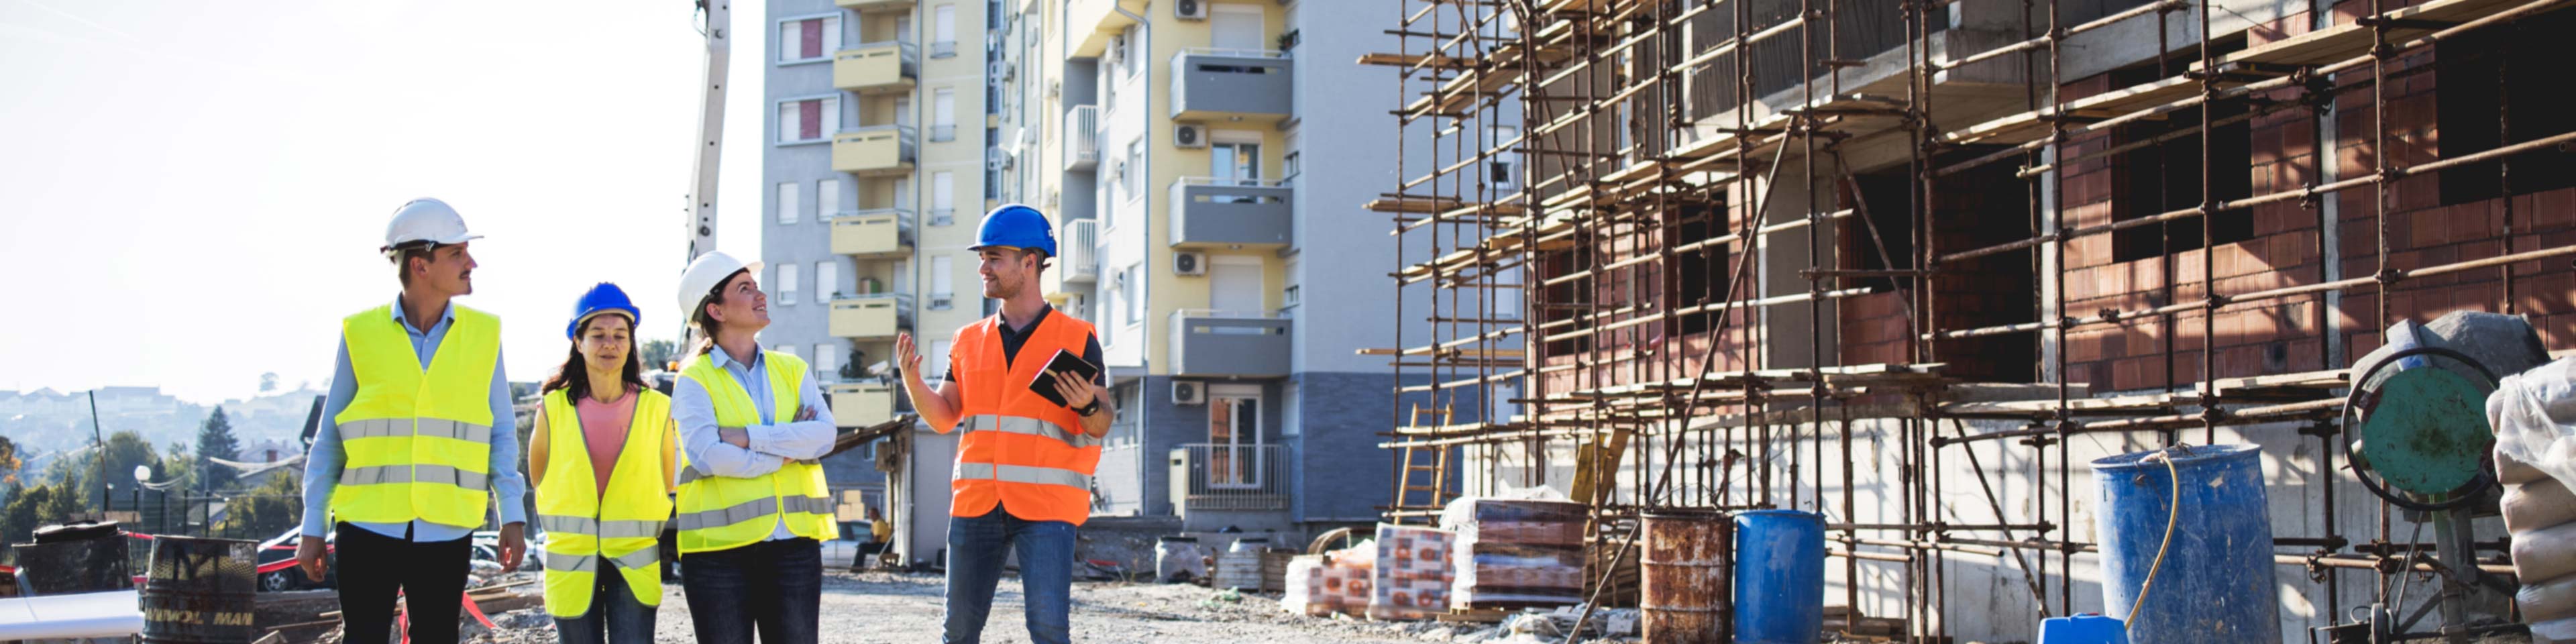 How to start a construction business: 7 things to consider